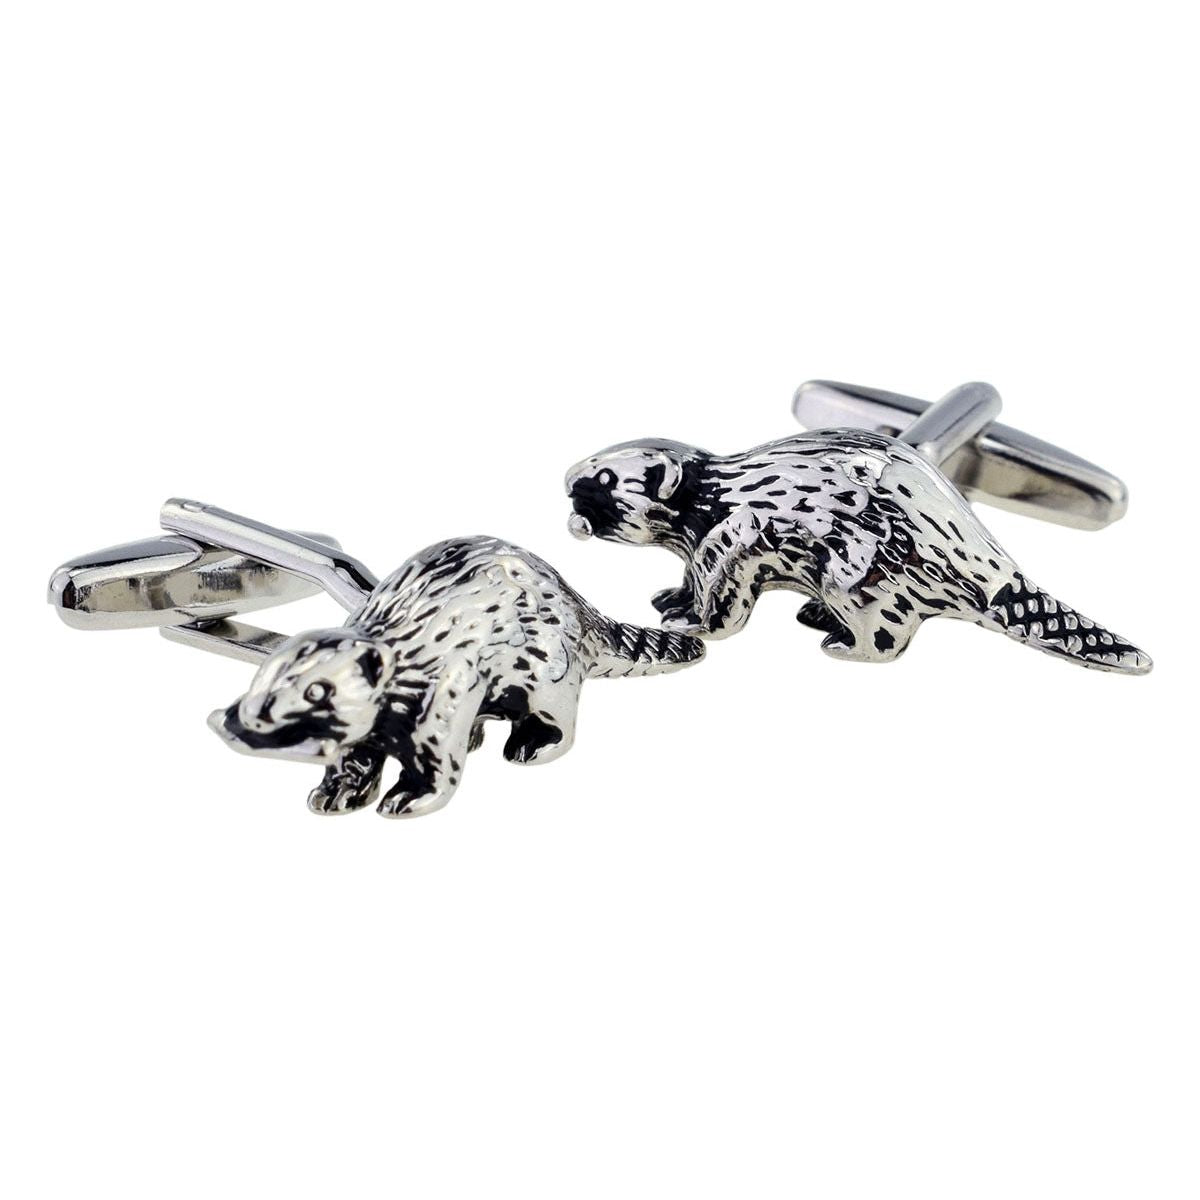 Highly detailed Beaver Cufflinks - Ashton and Finch